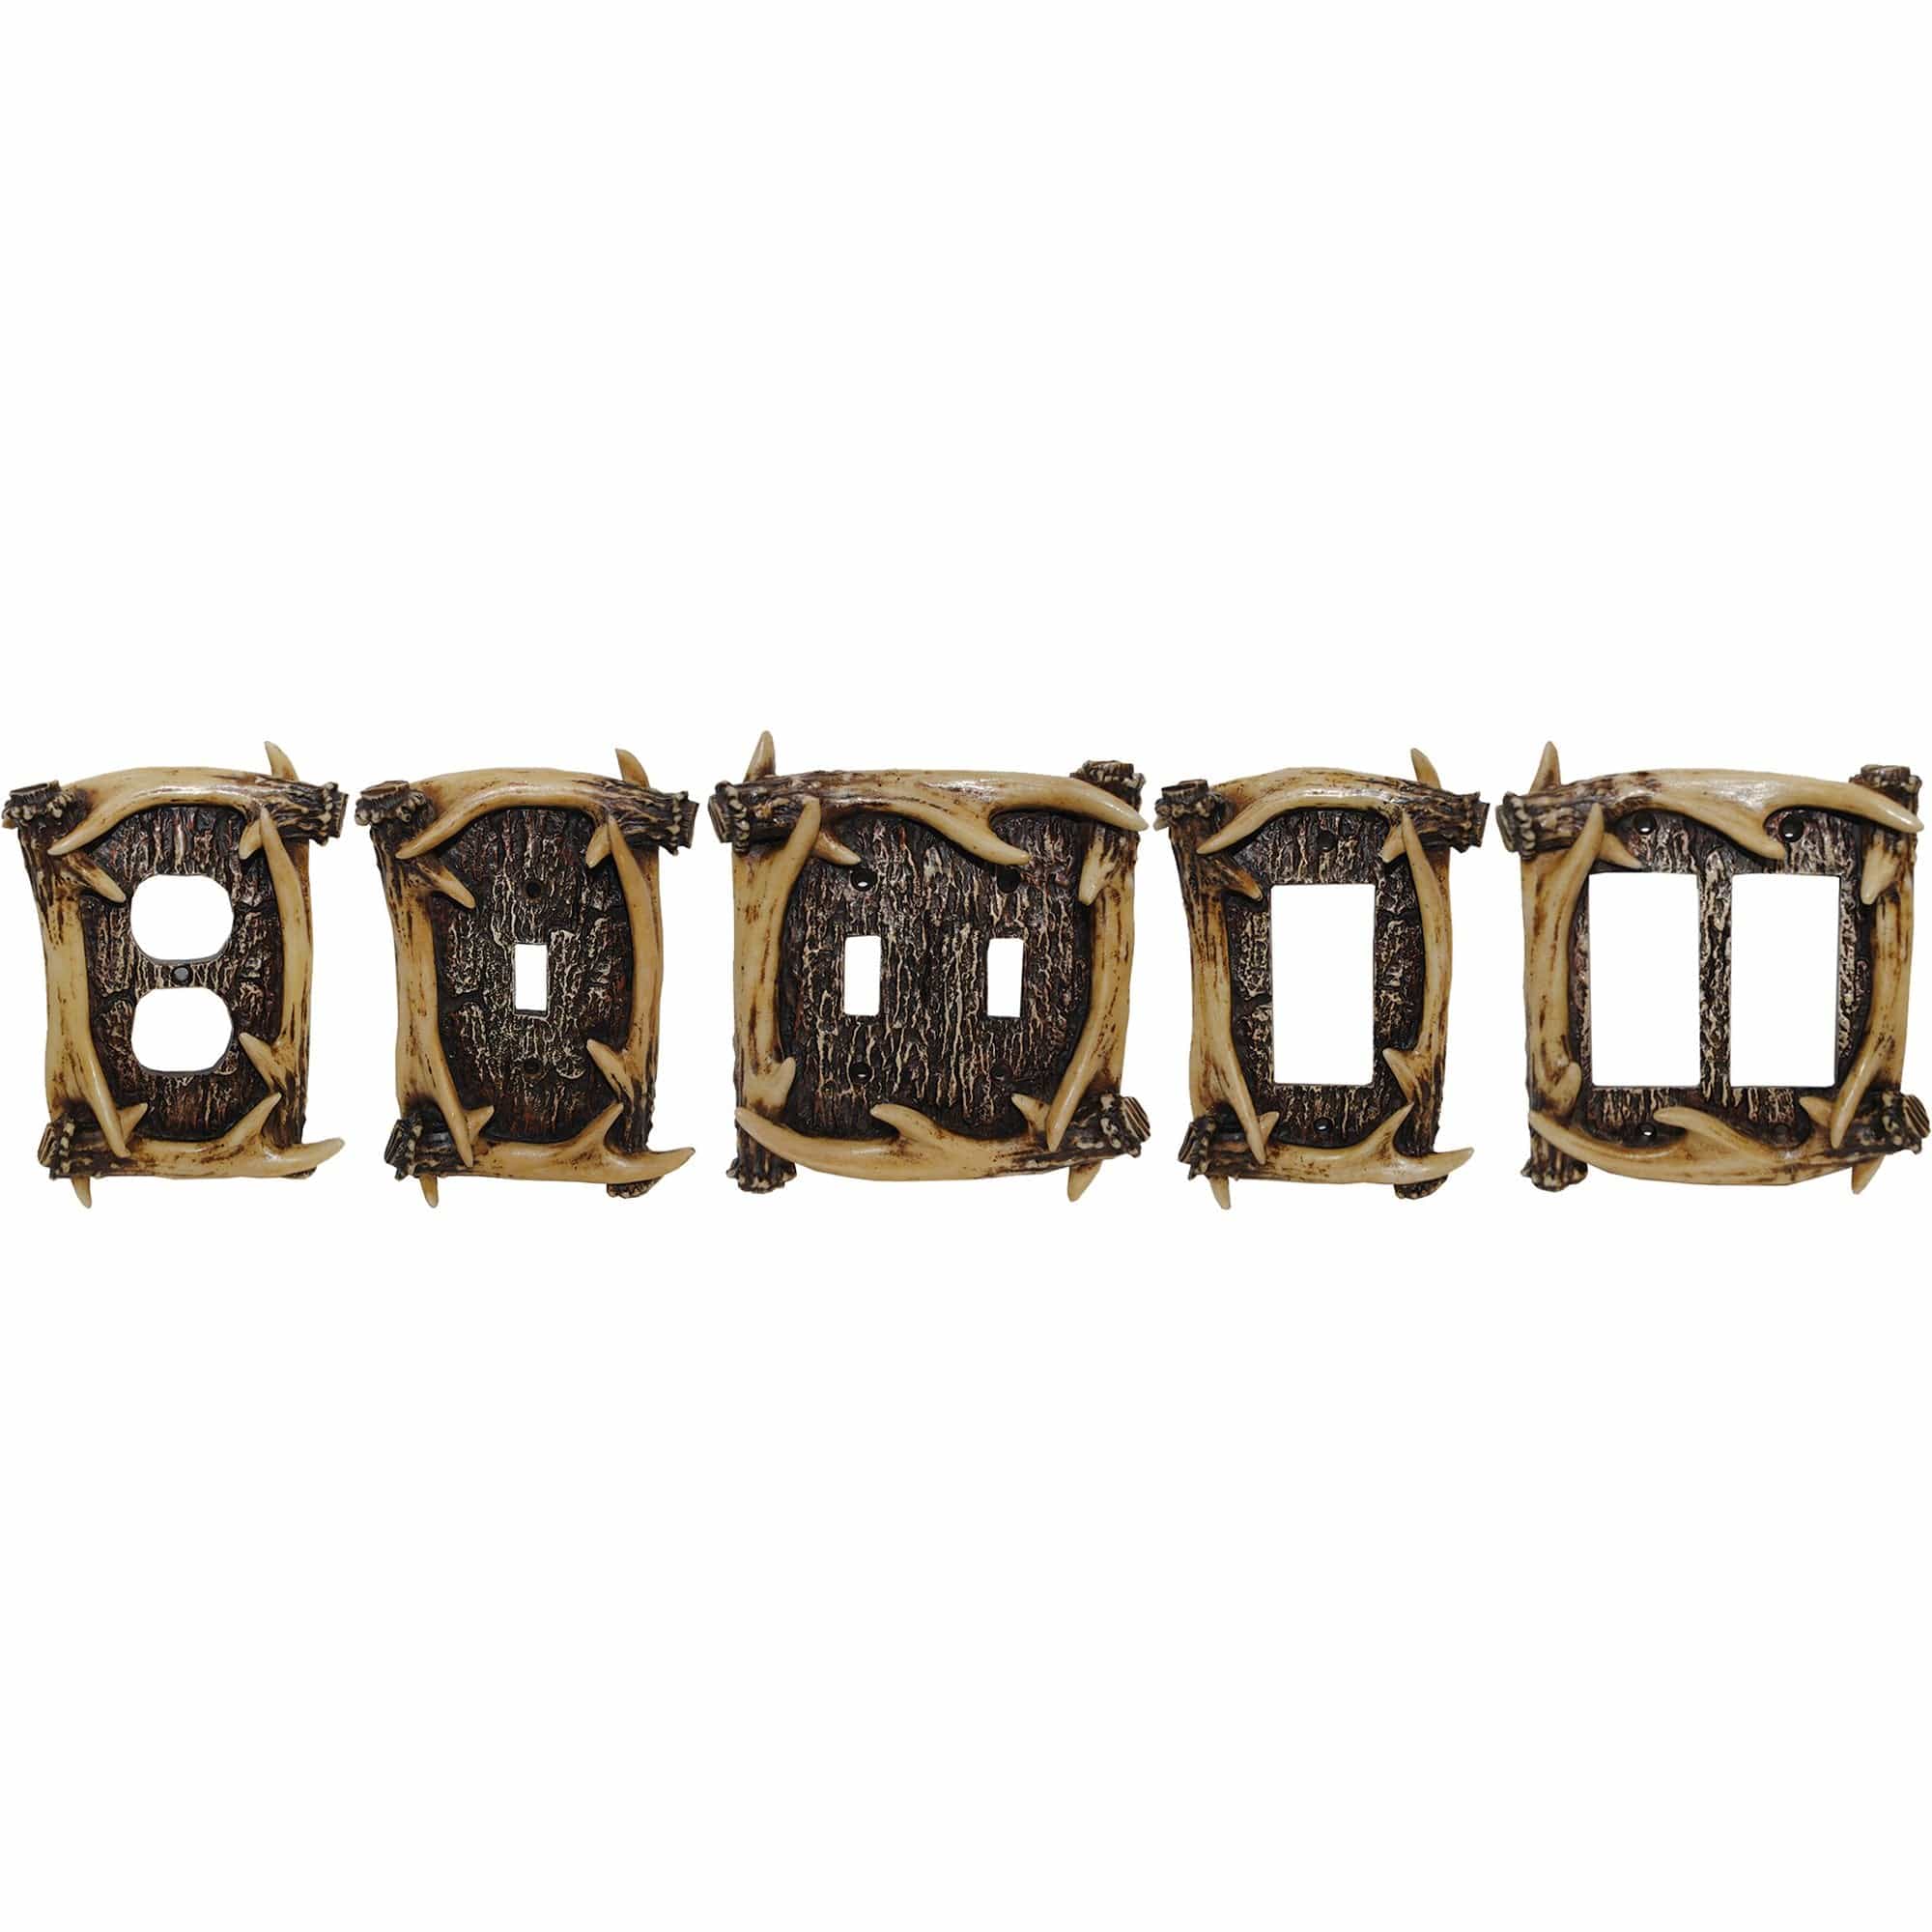 Antler Double Switch Wall Plate Switch Plates & Outlet Covers